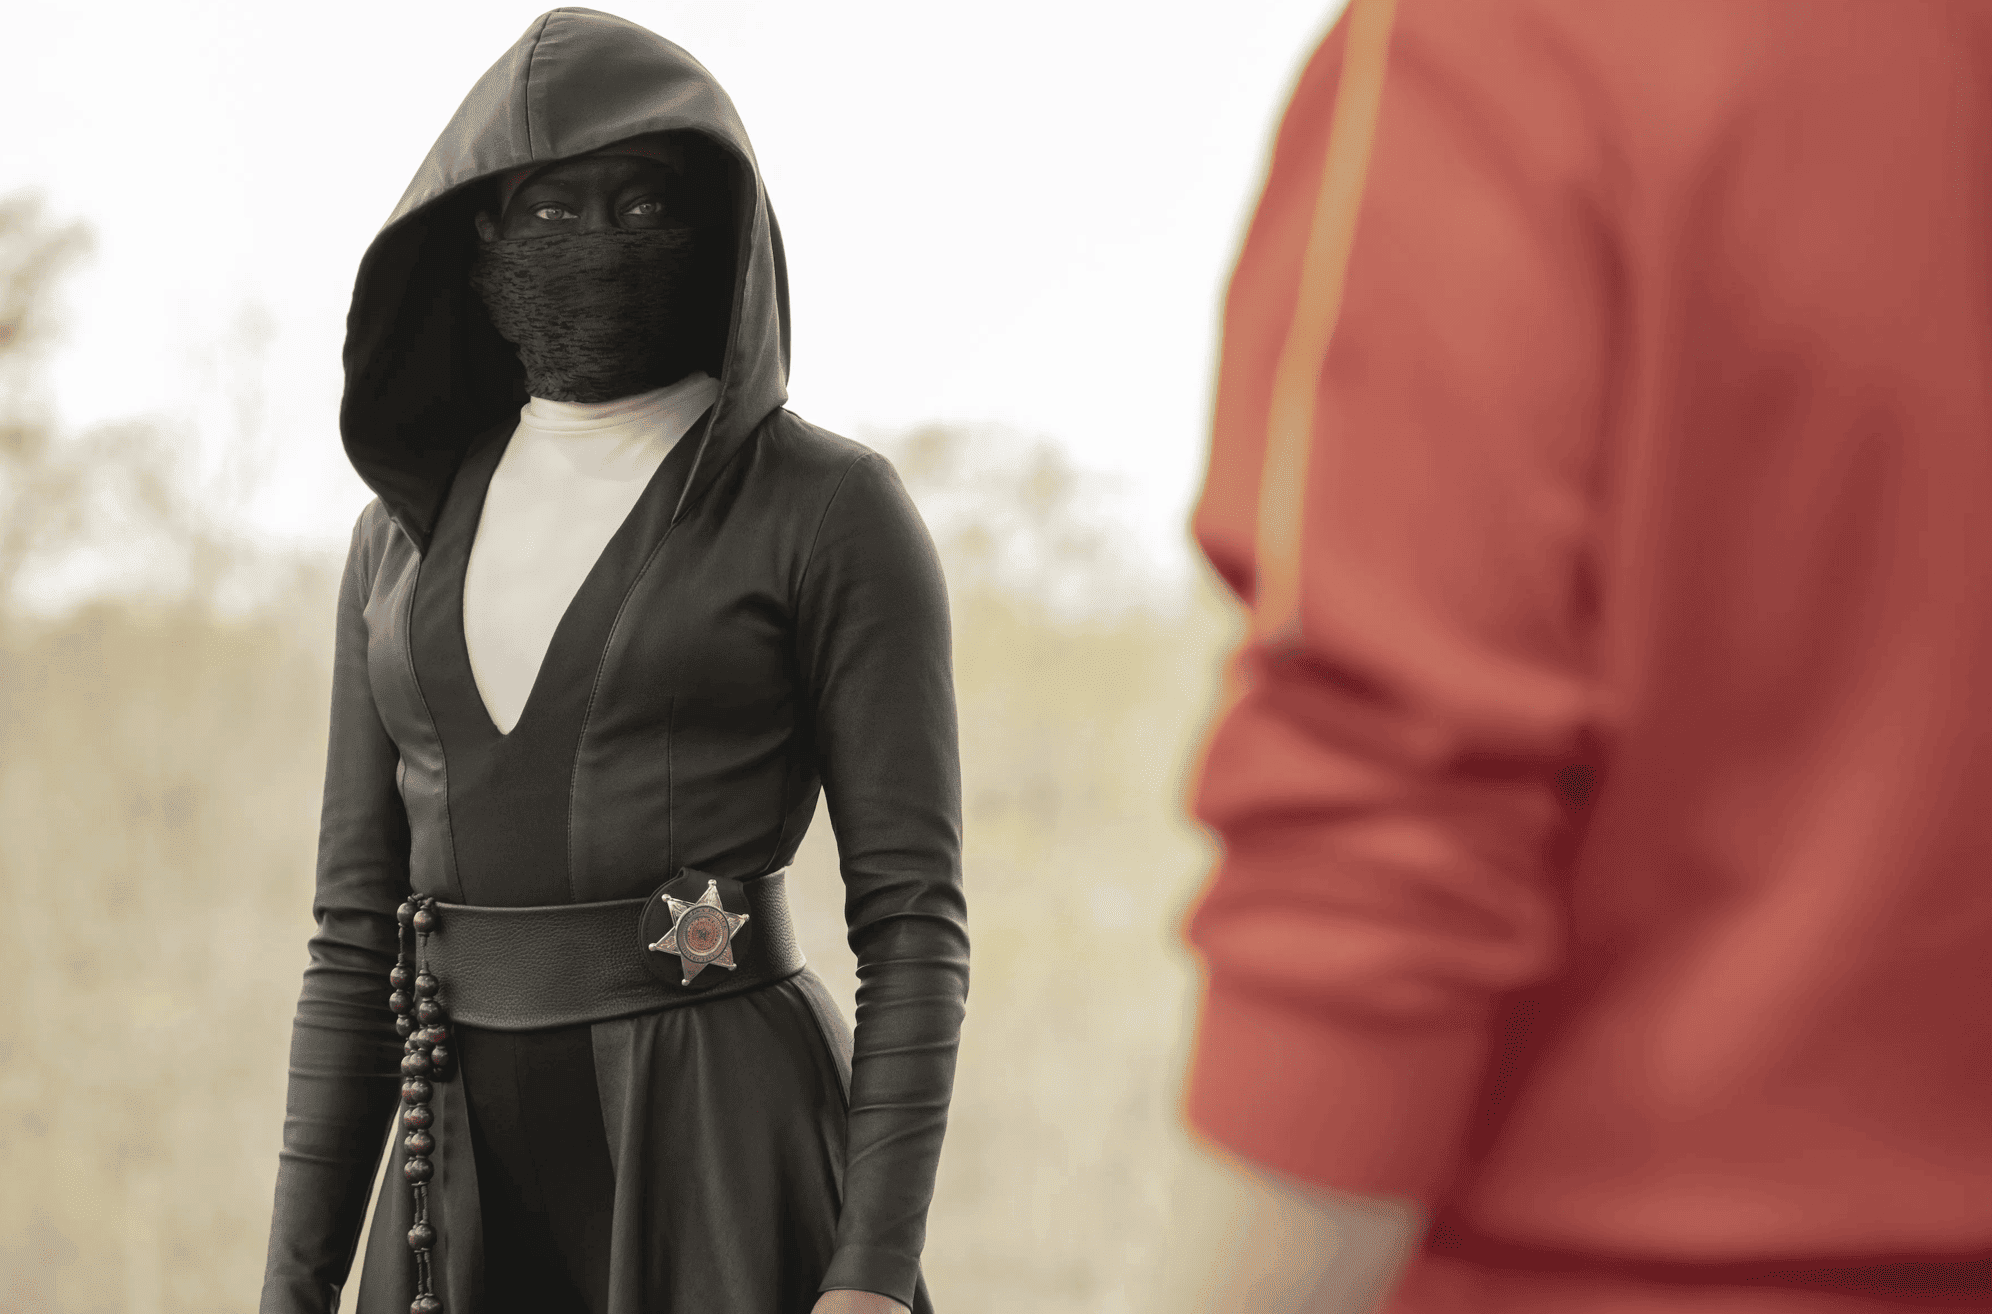 A masked woman with a badge on her hip stands in front of a person in this image from White Rabbit.